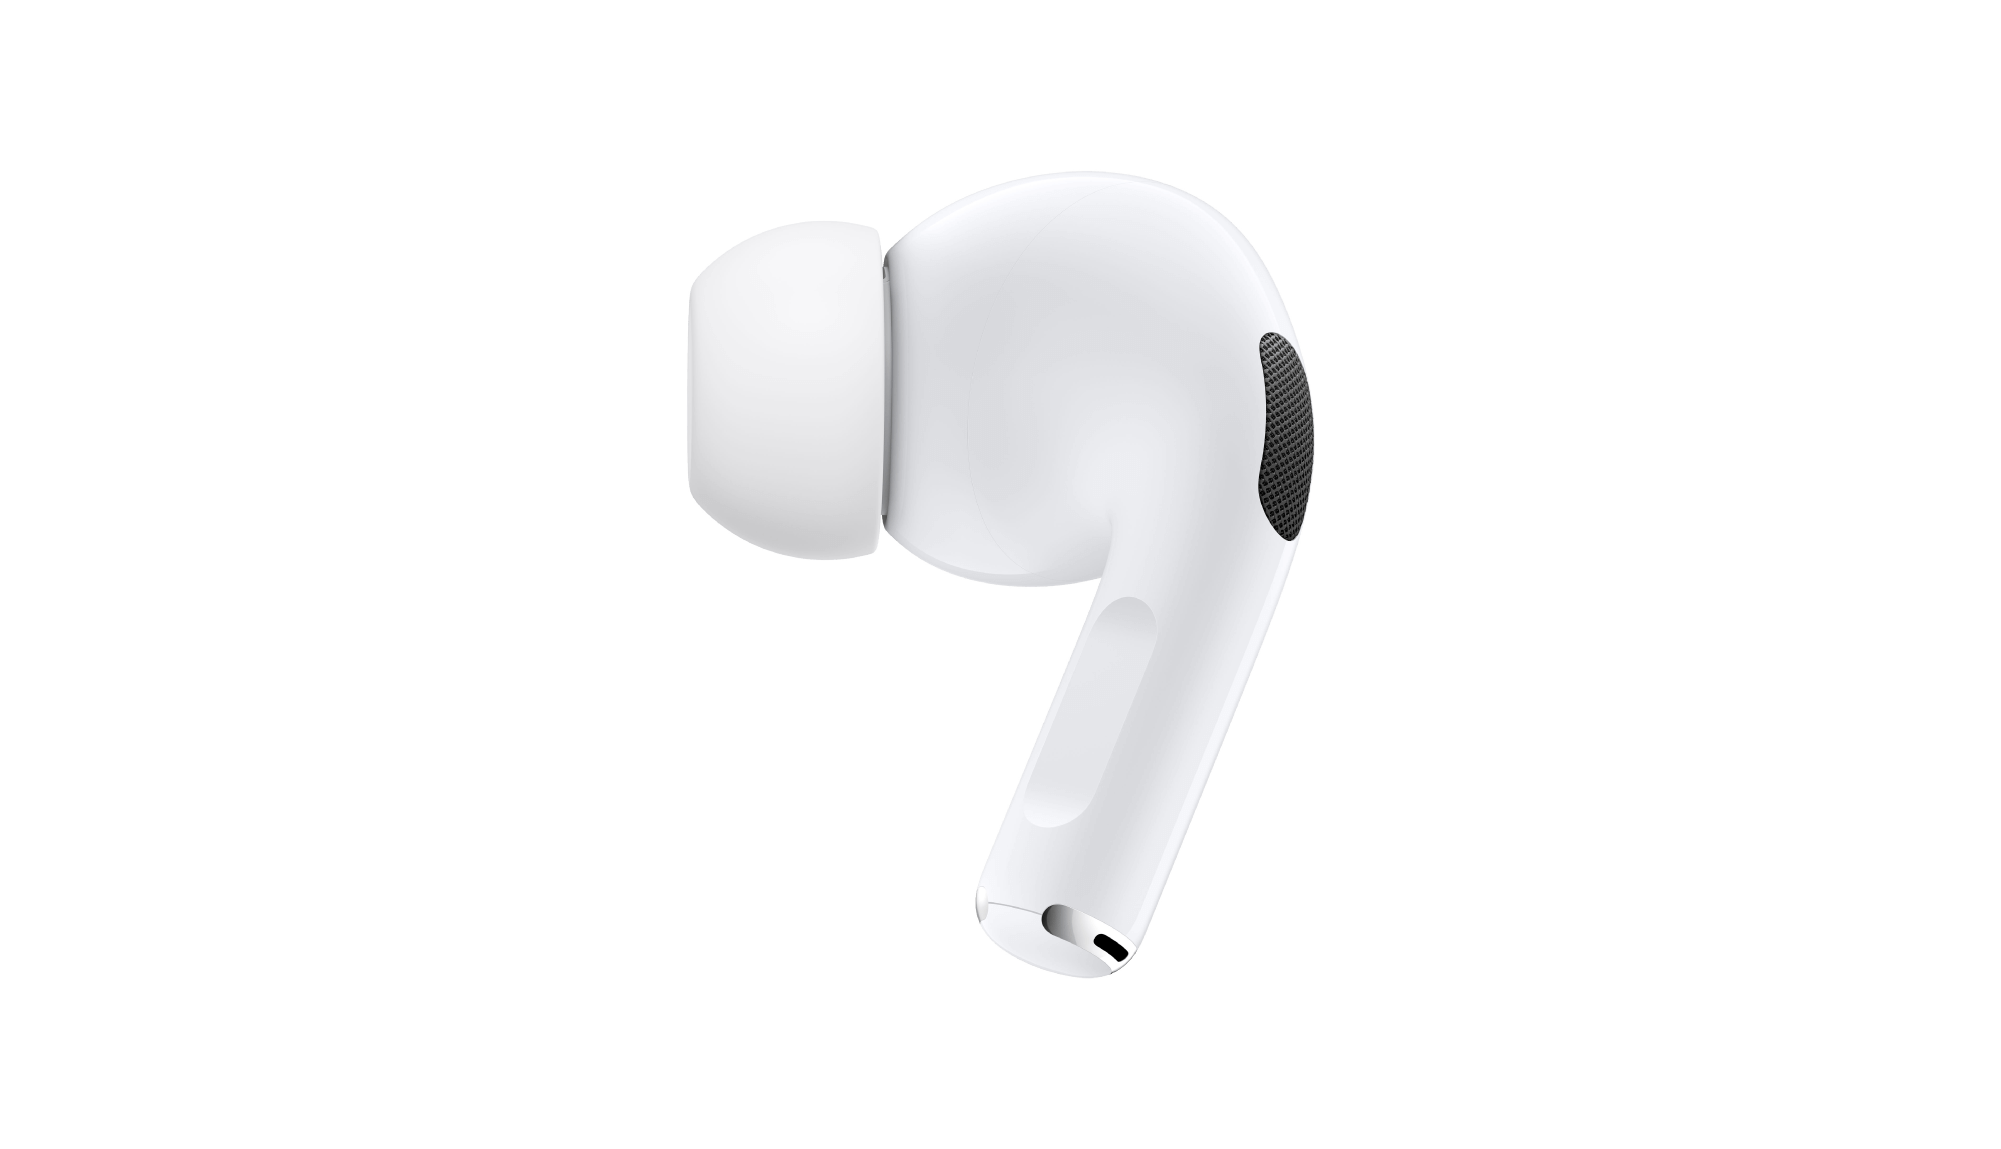 AIRPODS Pro 2nd Generation. A2190 AIRPODS. Беспроводные наушники Apple AIRPODS Pro 2. Левый наушник Apple AIRPODS Pro.